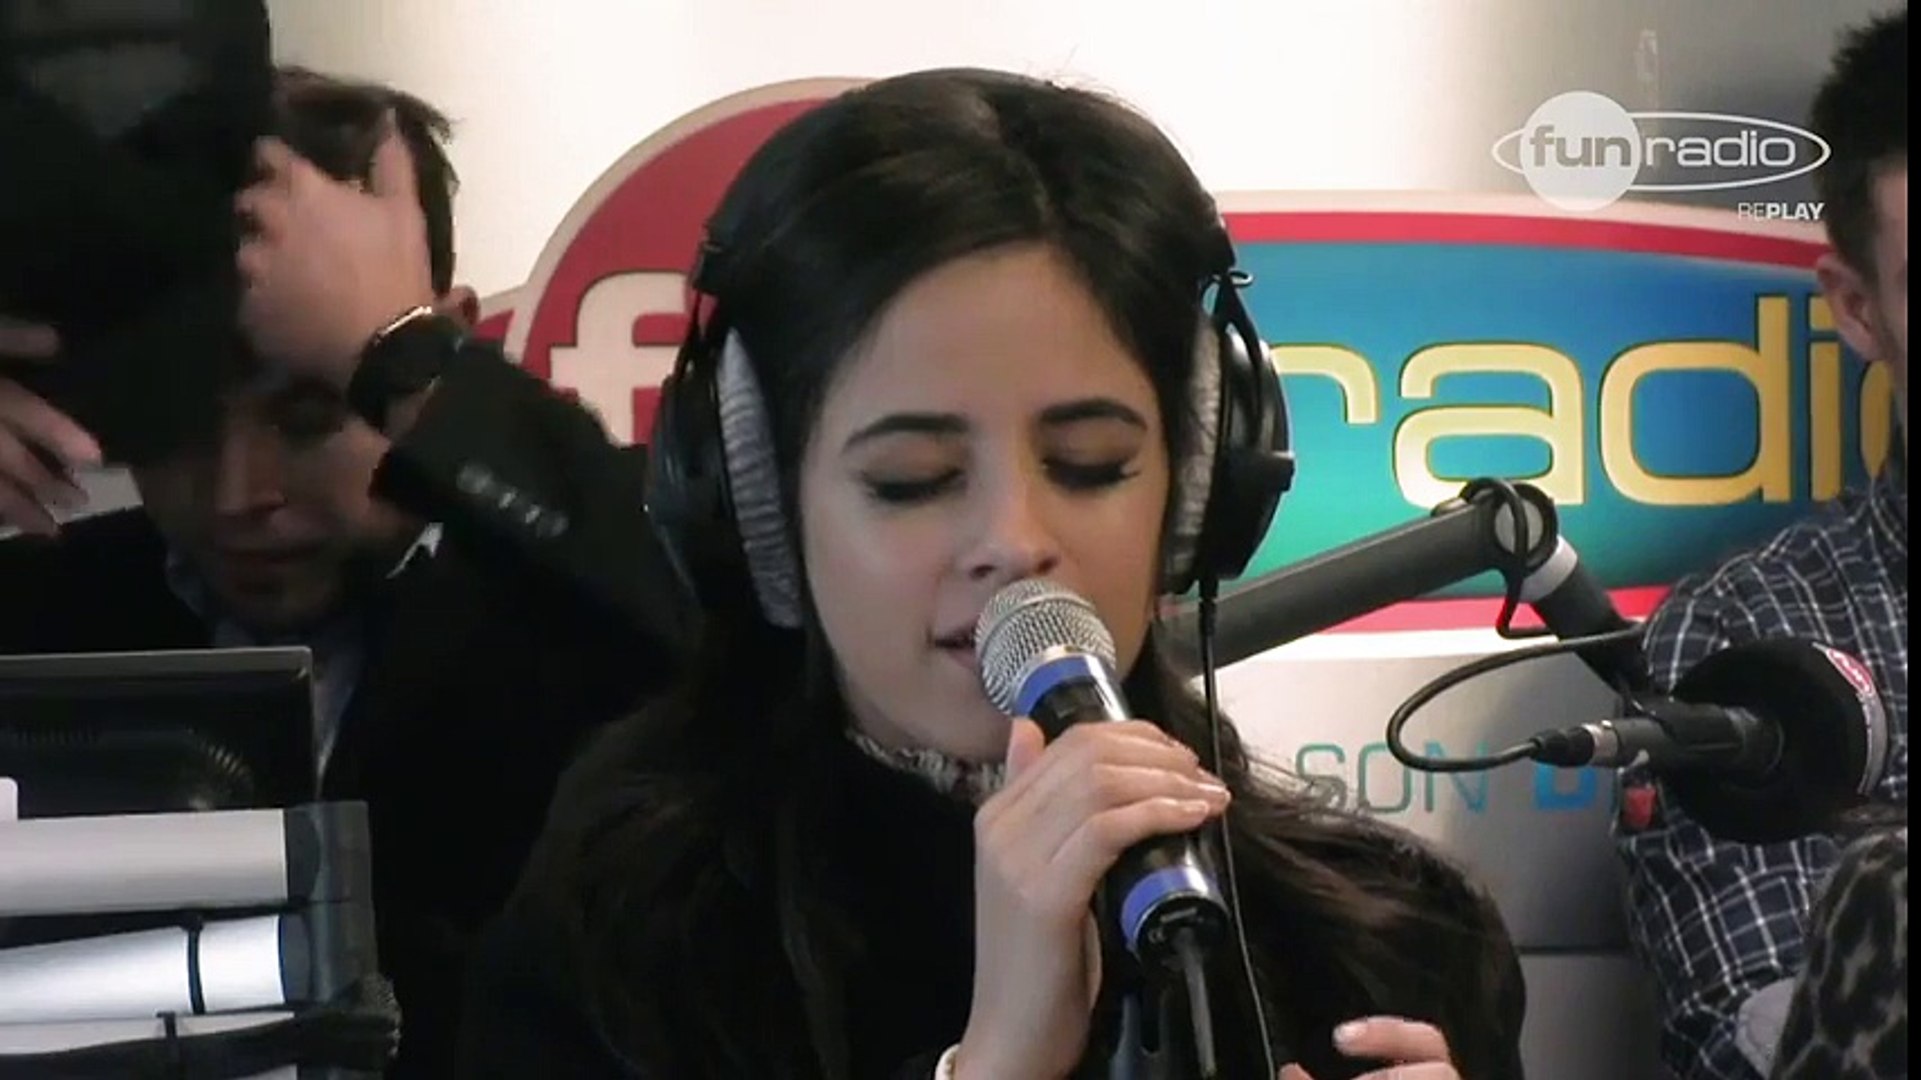 Fifth Harmony - Work from Home (Live at Fun Radio) - Vidéo Dailymotion